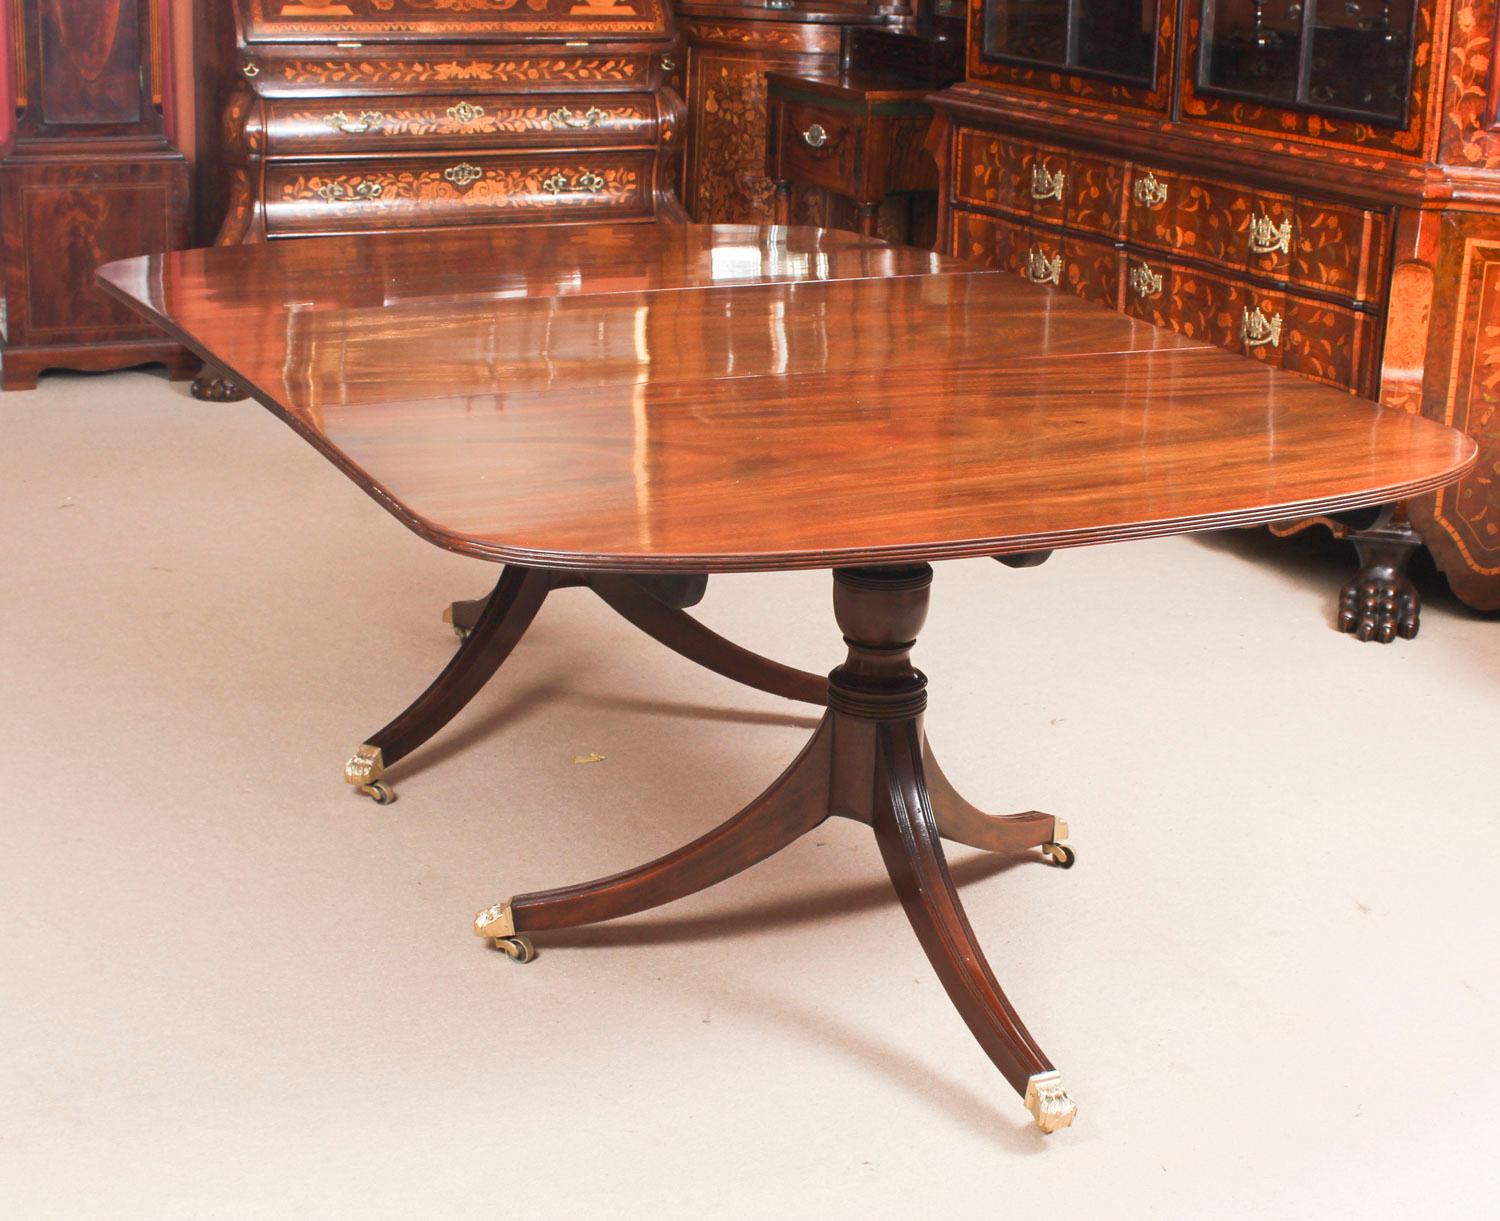 English George III Regency Dining Table 19th Century with 8 Bespoke Dining Chairs